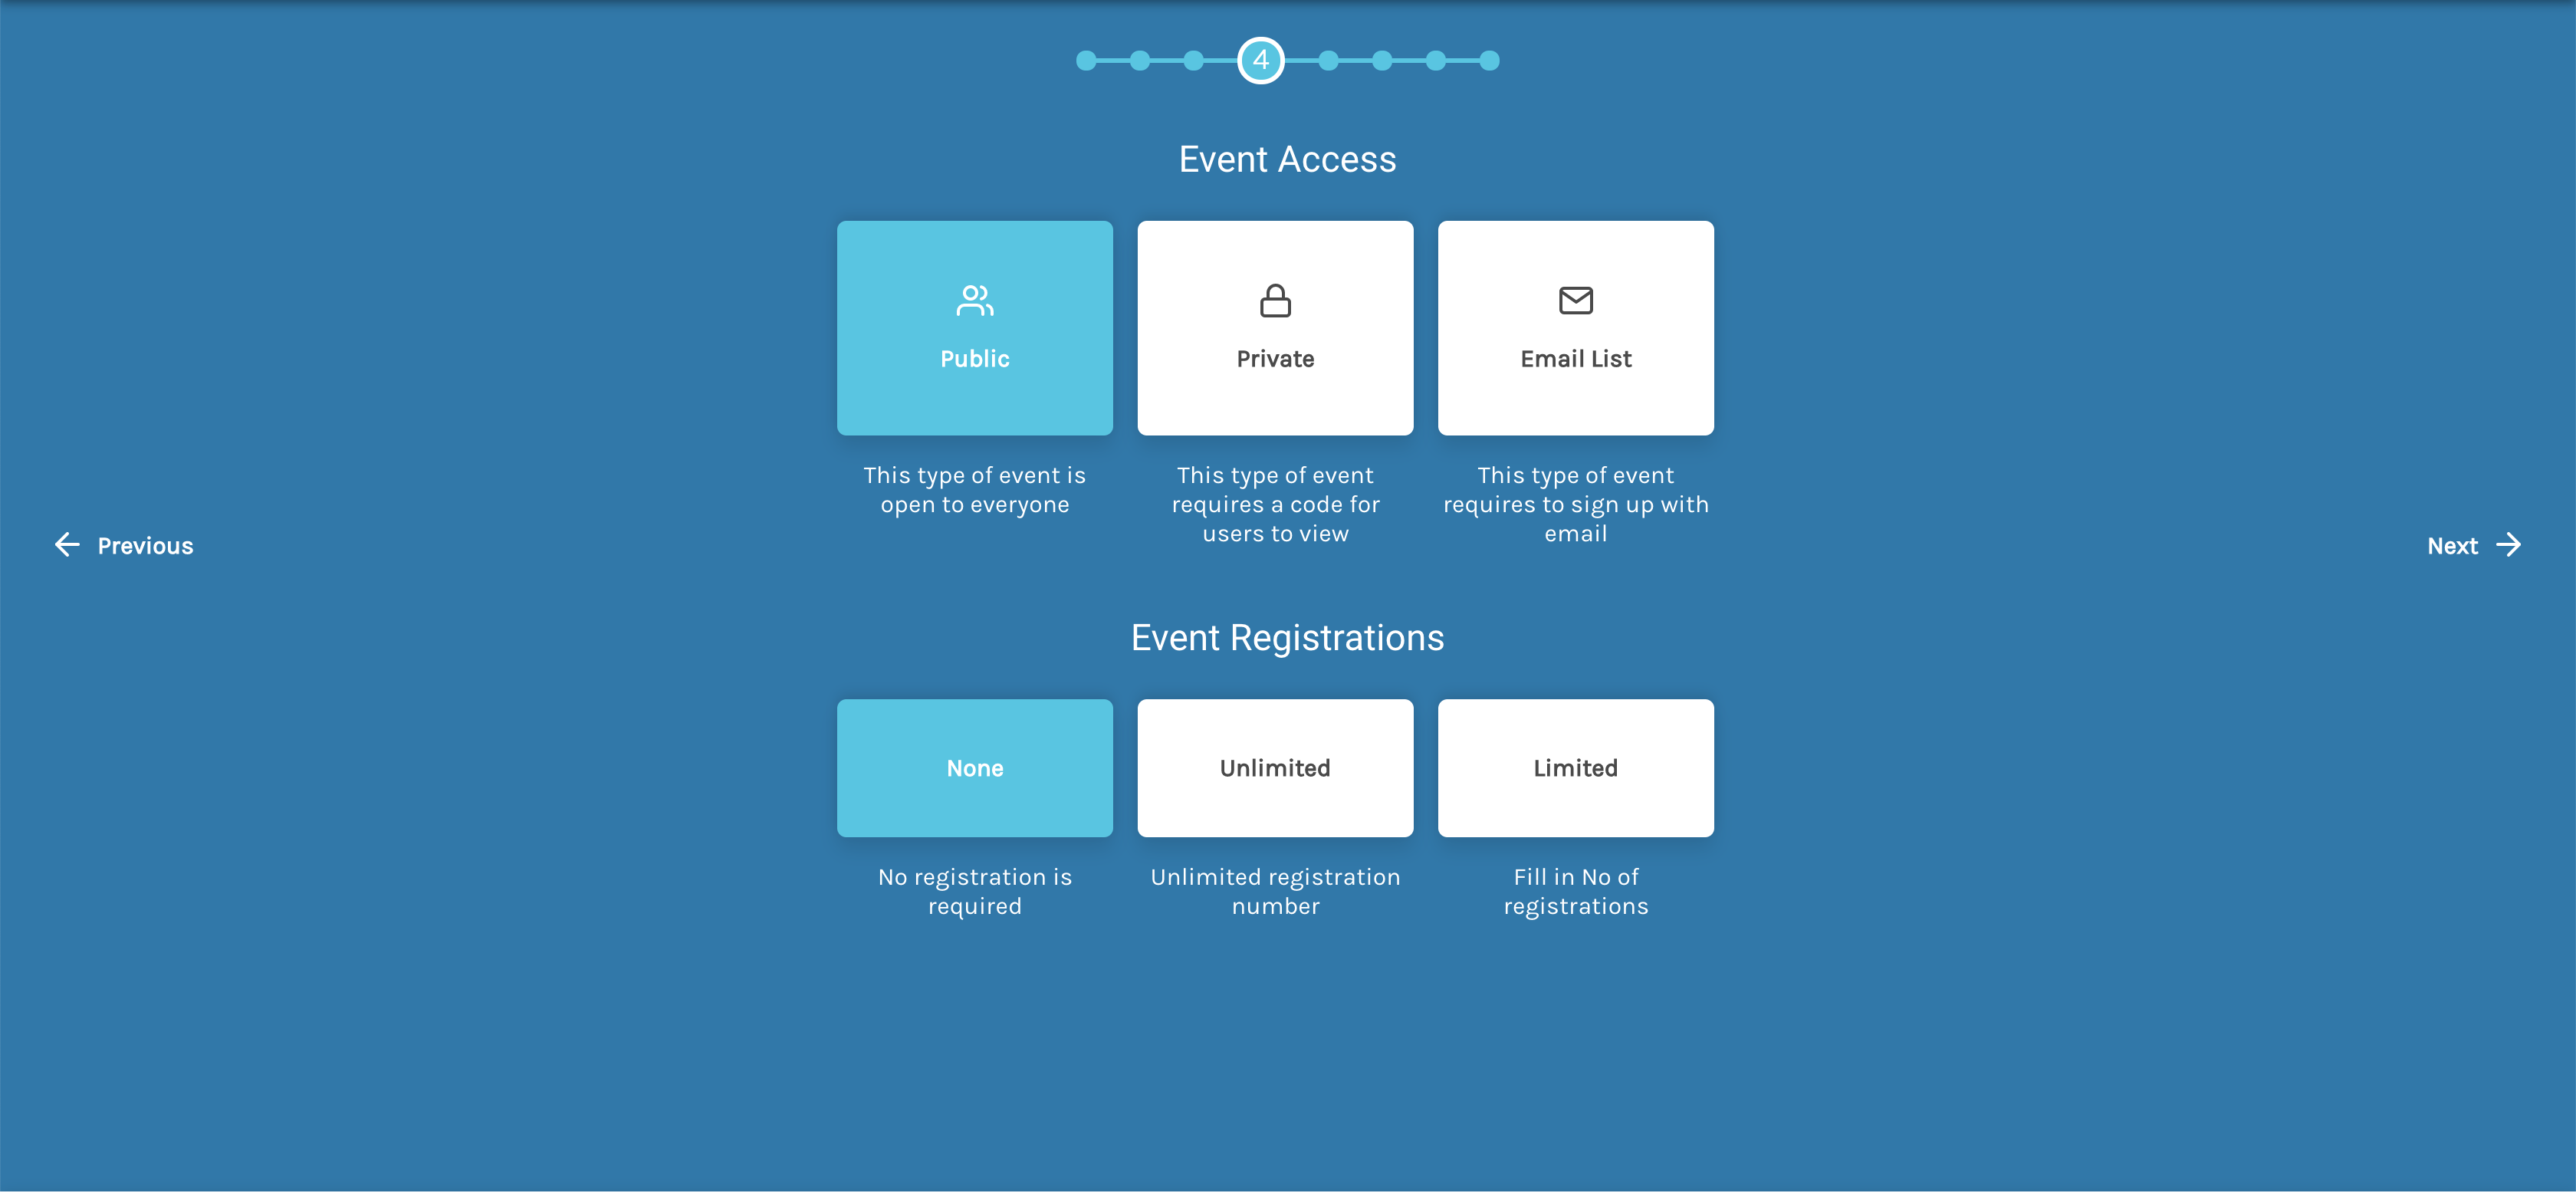 create-event-step-4.png